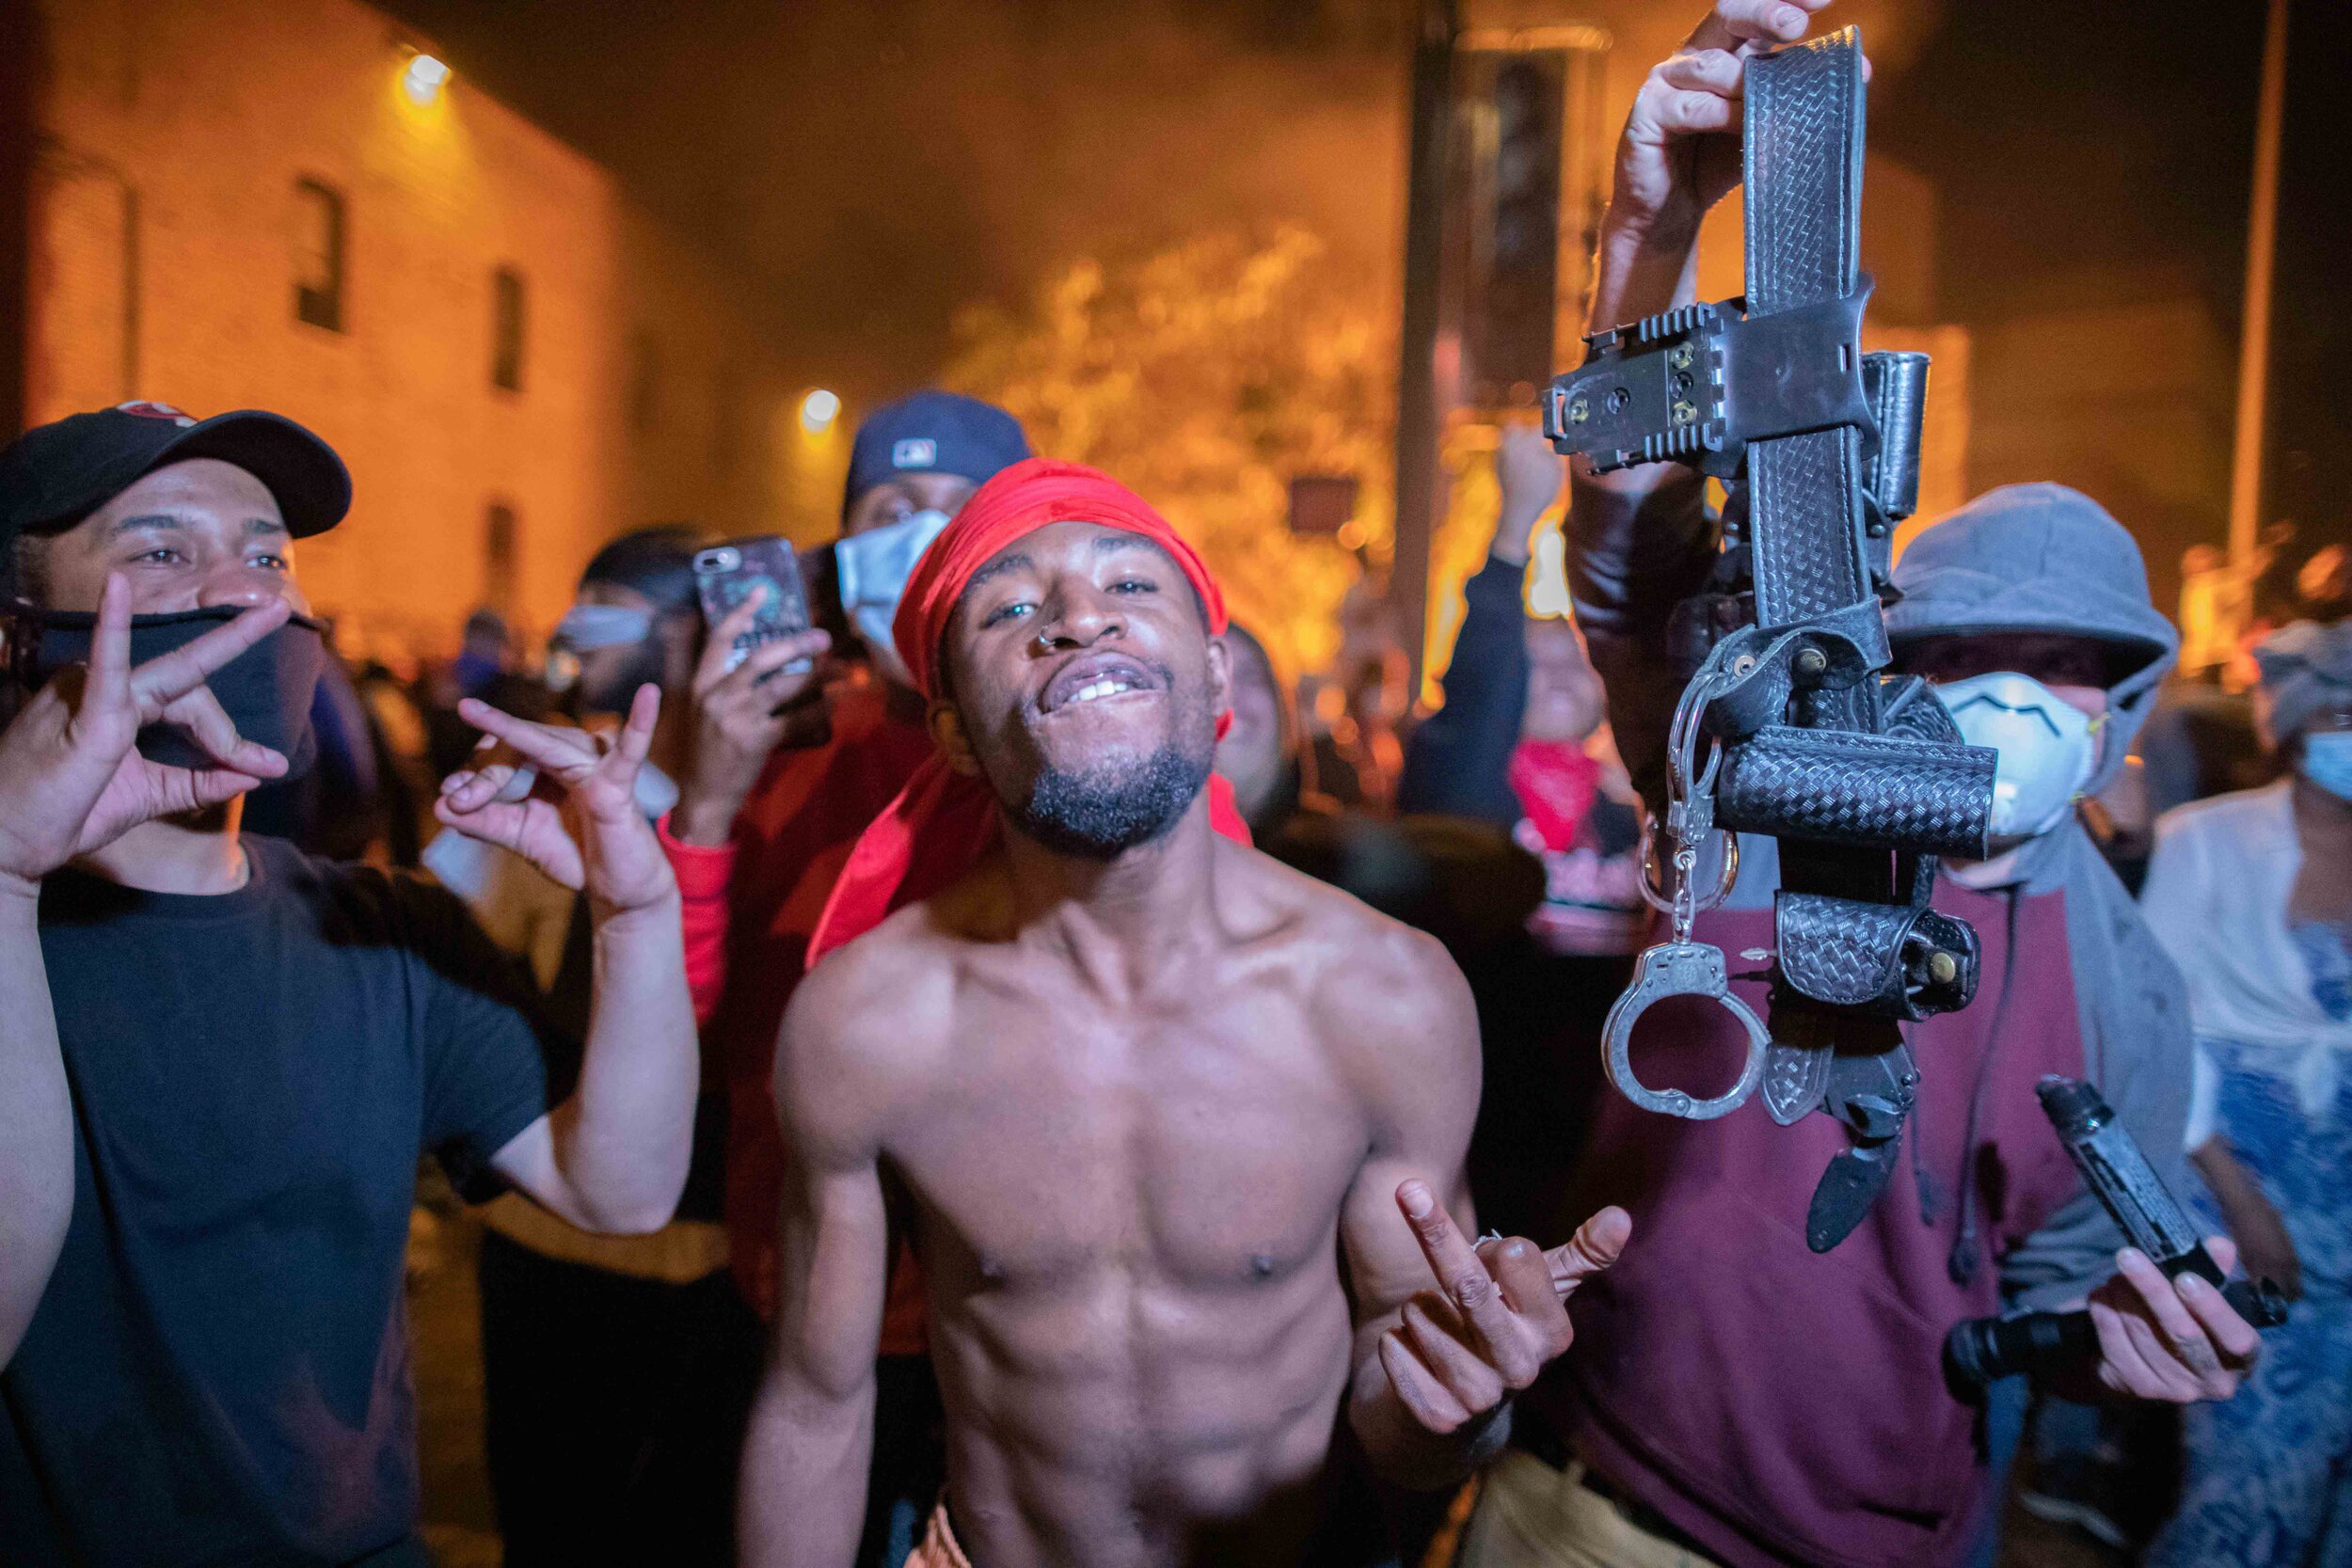  As the 3rd police precinct in Minneapolis, Minnesota burns behind him a protester and his friend proudly hold up a police belt during a riot over the killing of George Floyd on May 28. 